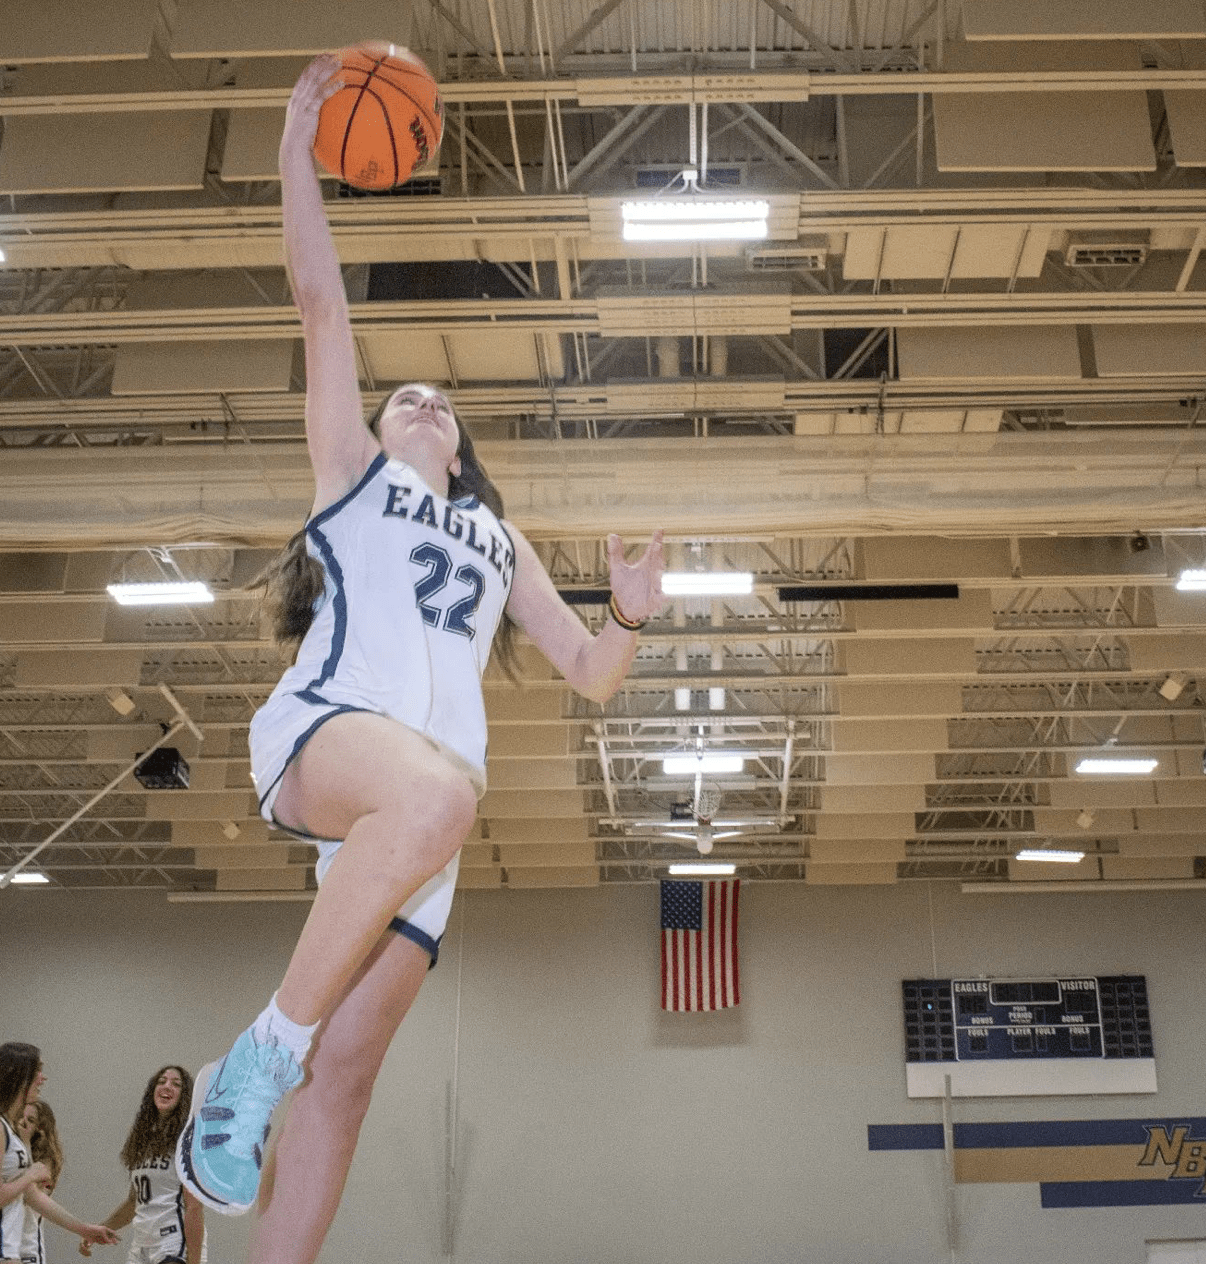 Riley Weiss Sets School Record With 50 Points in North Broward Prep Girls Basketball 1st Win